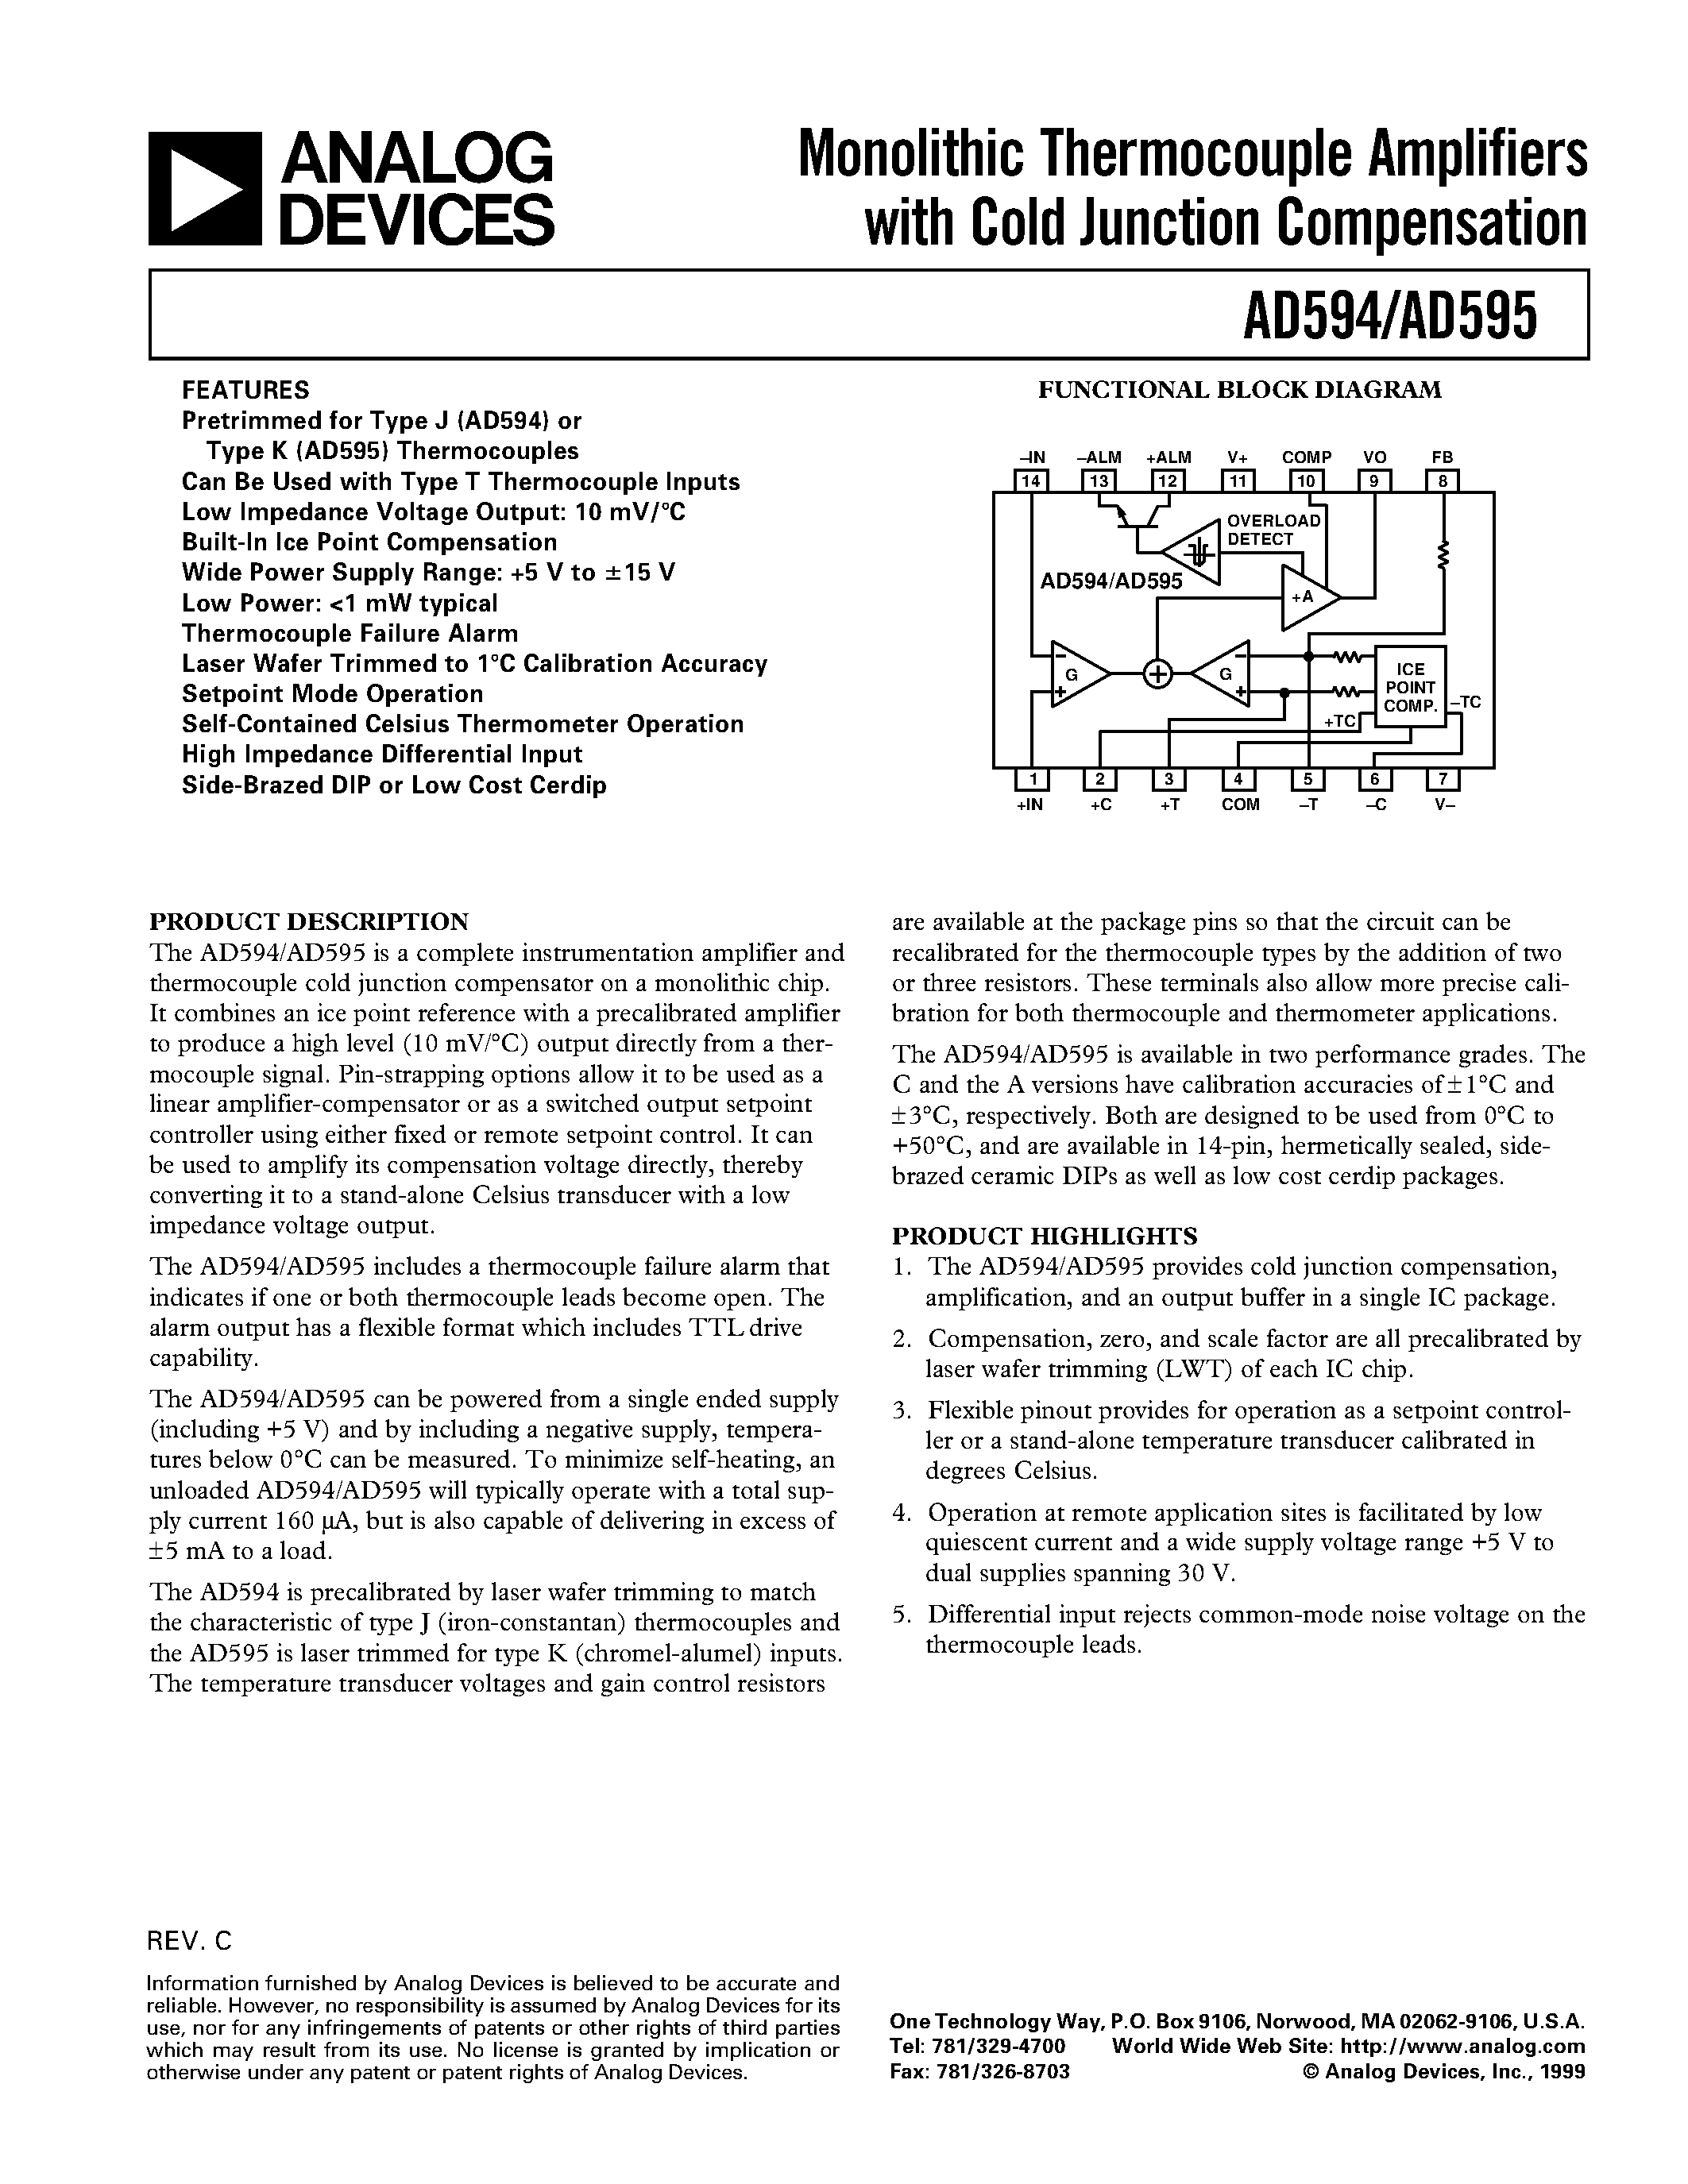 Datasheet AD595 - Monolithic Thermocouple Amplifiers with Cold Junction Compensation page 1